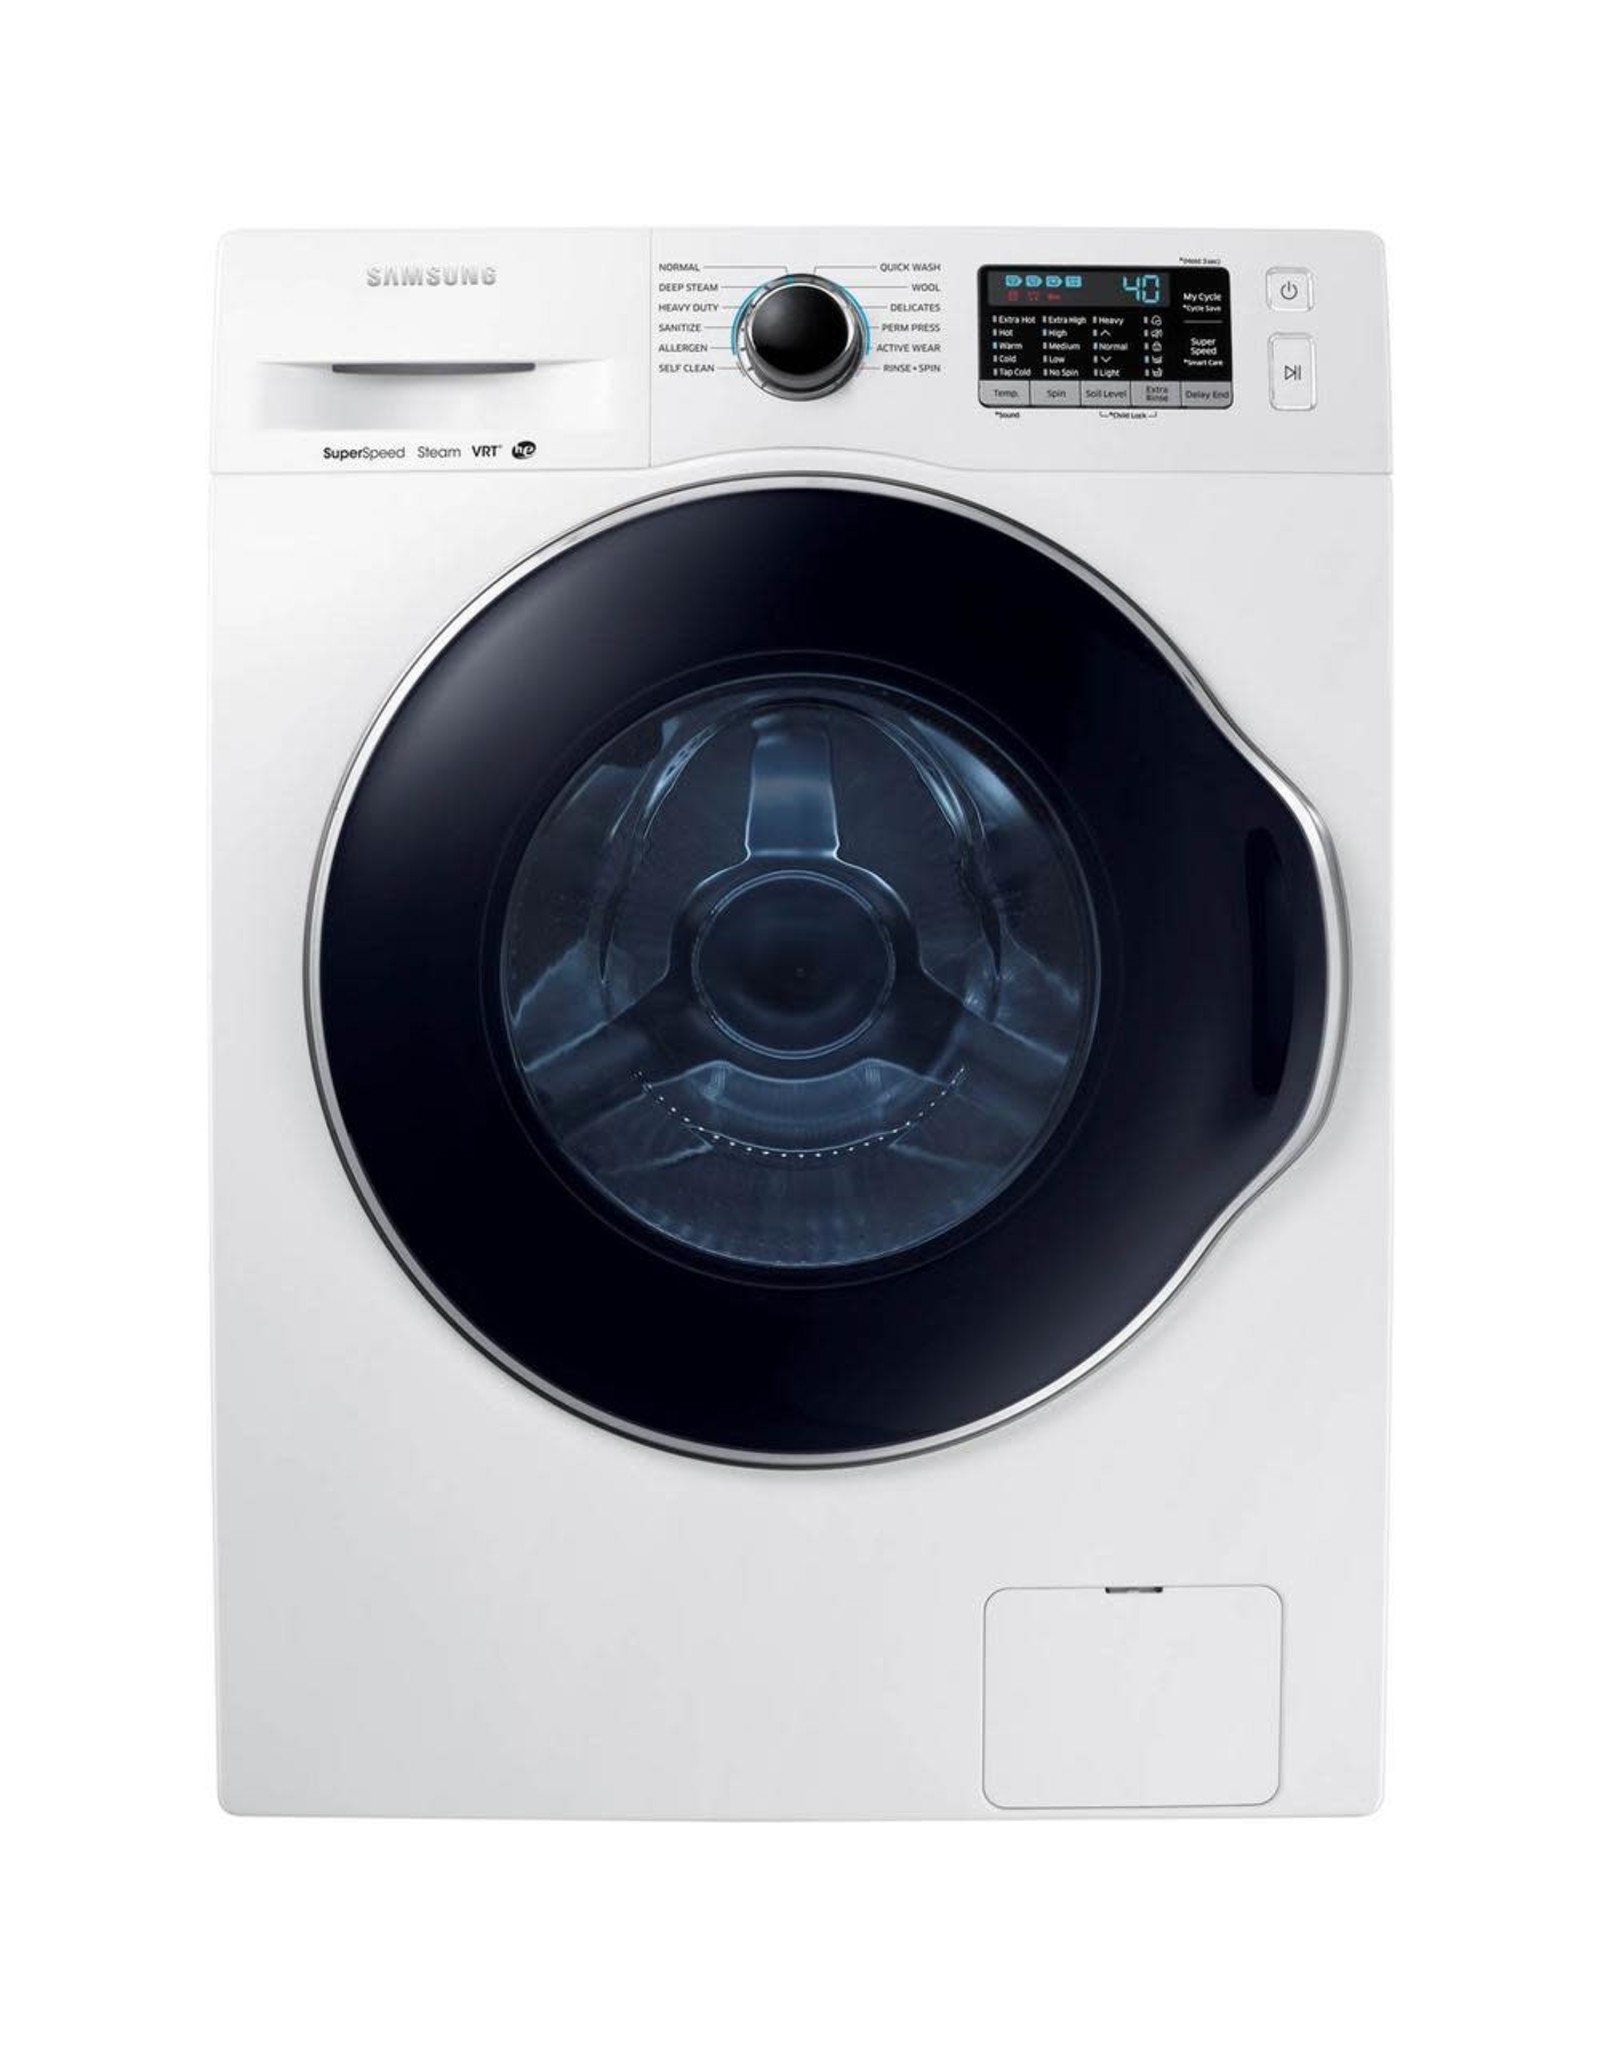 SAMSUNG WW22K6800AW  2.2 cu. Slim High-Efficiency Front Load Washer with Steam in White